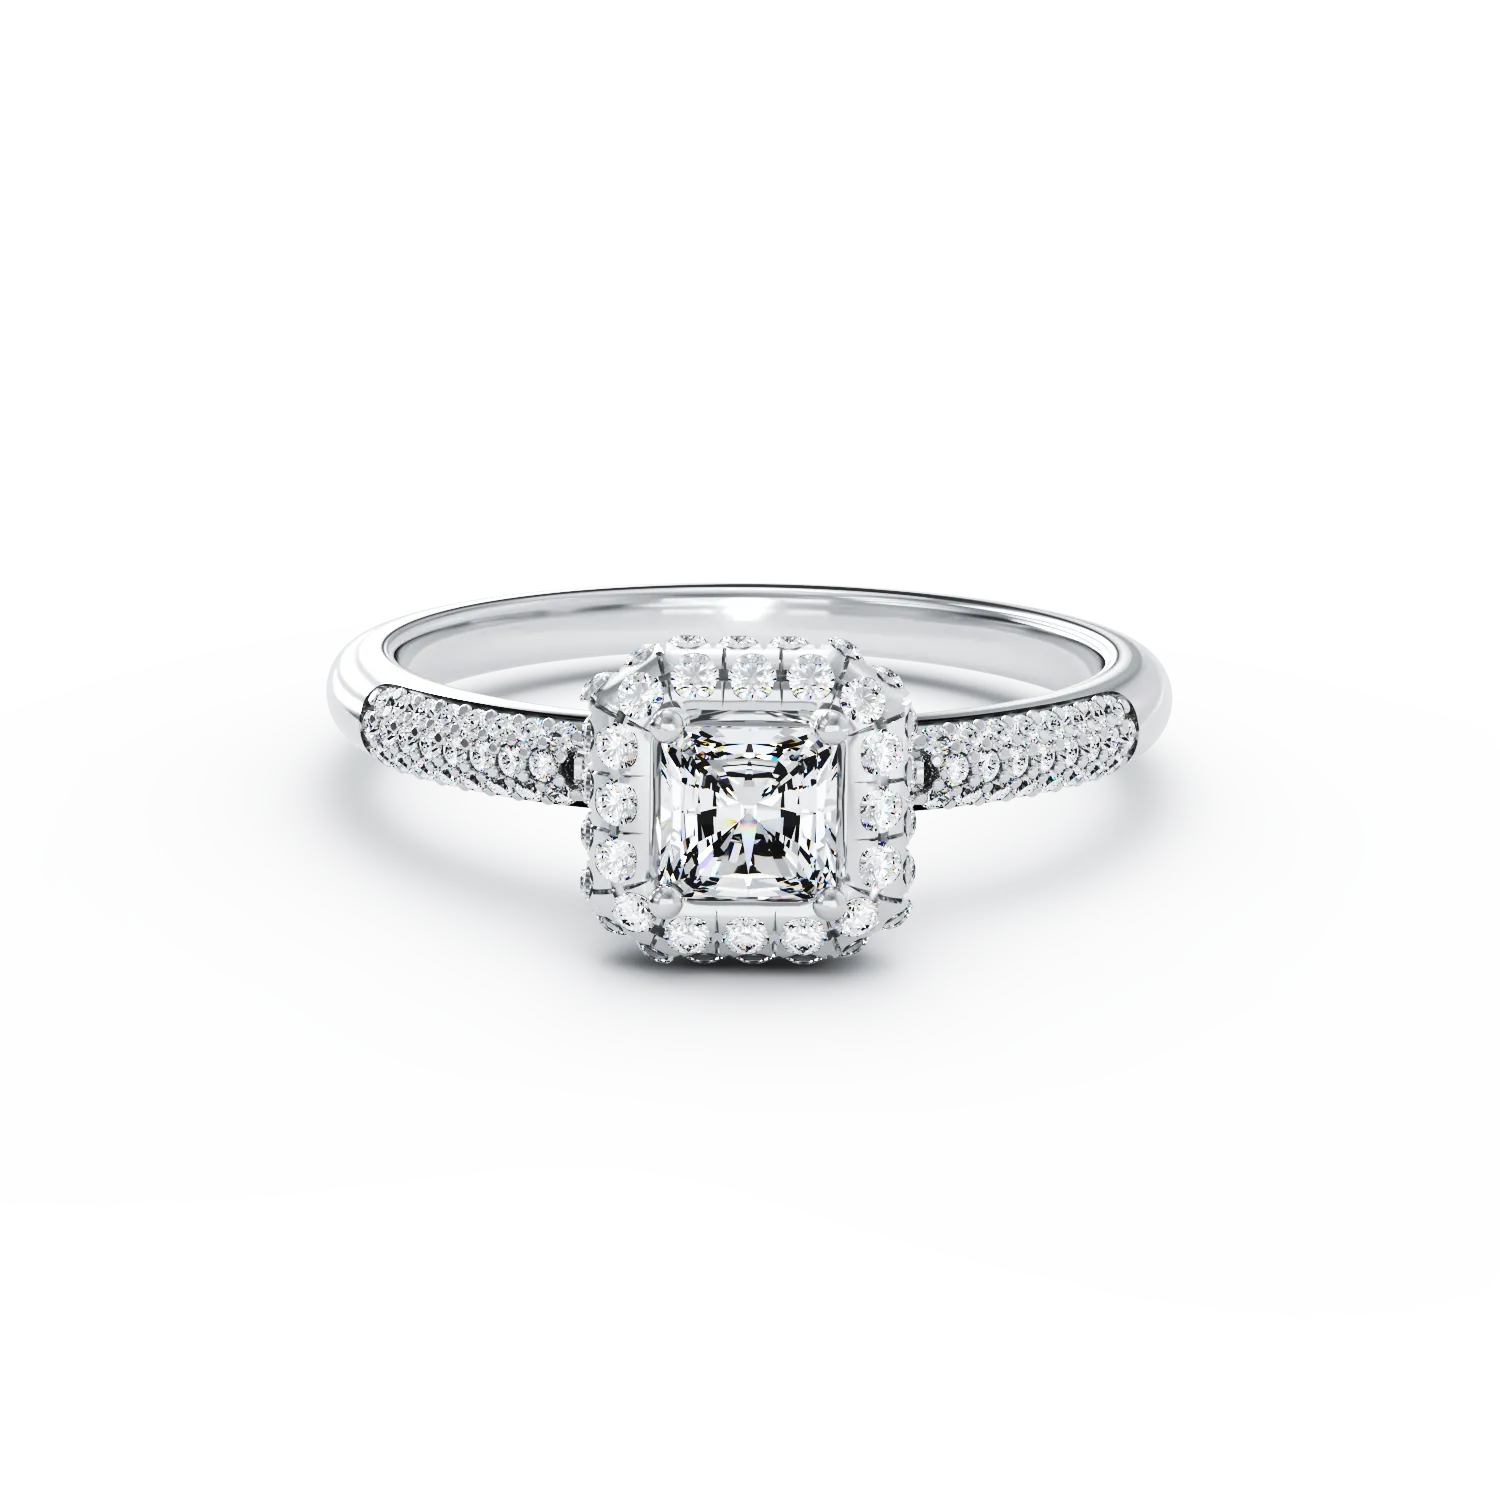 18K white gold engagement ring with diamond of 0.21ct and diamonds of 0.44ct